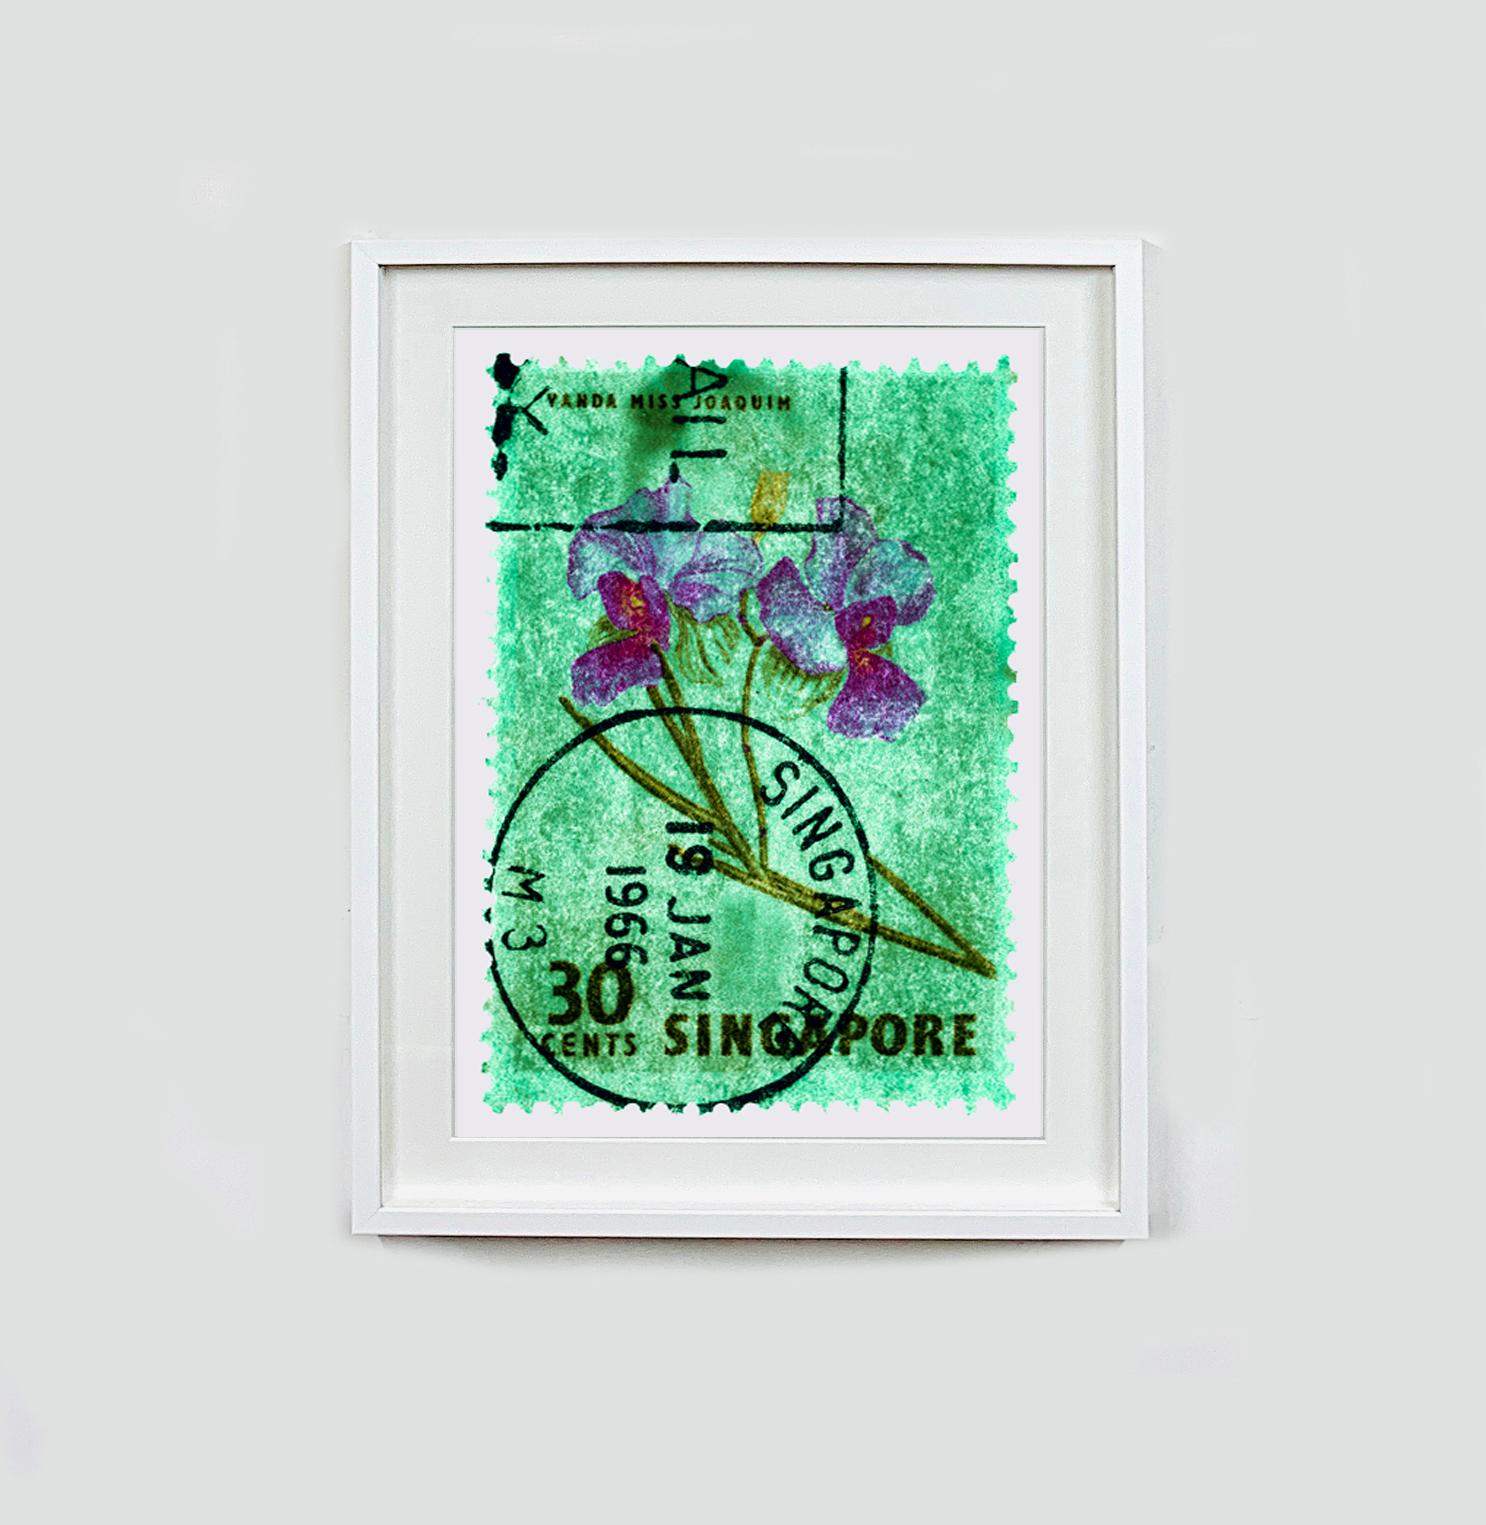 Singapore Stamp Collection, 30c Singapore Orchid Green - Floral color photo - Pop Art Print by Heidler & Heeps